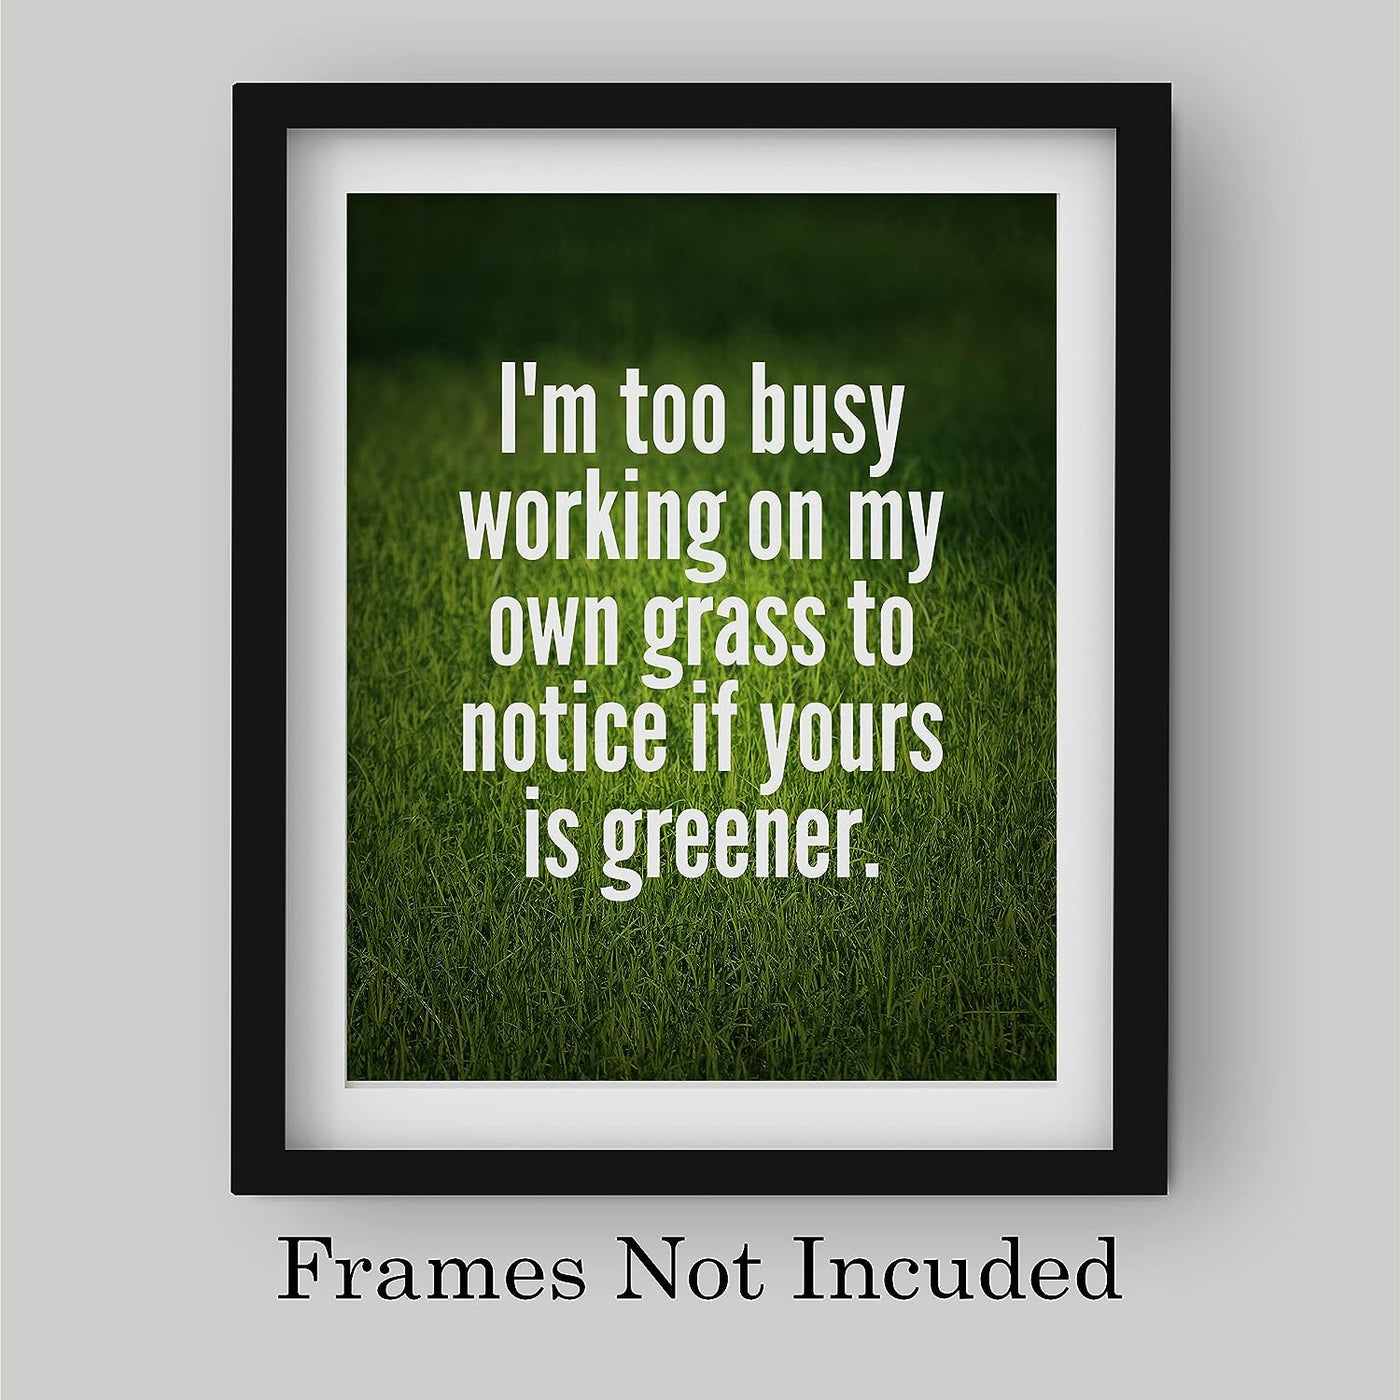 Too Busy Working on My Own Grass Motivational Quotes Wall Sign -8x10" Inspirational Green Grass Photo Print-Ready to Frame. Modern Typographic Design. Home-Office-Desk Decor. Reminder to Stay True!